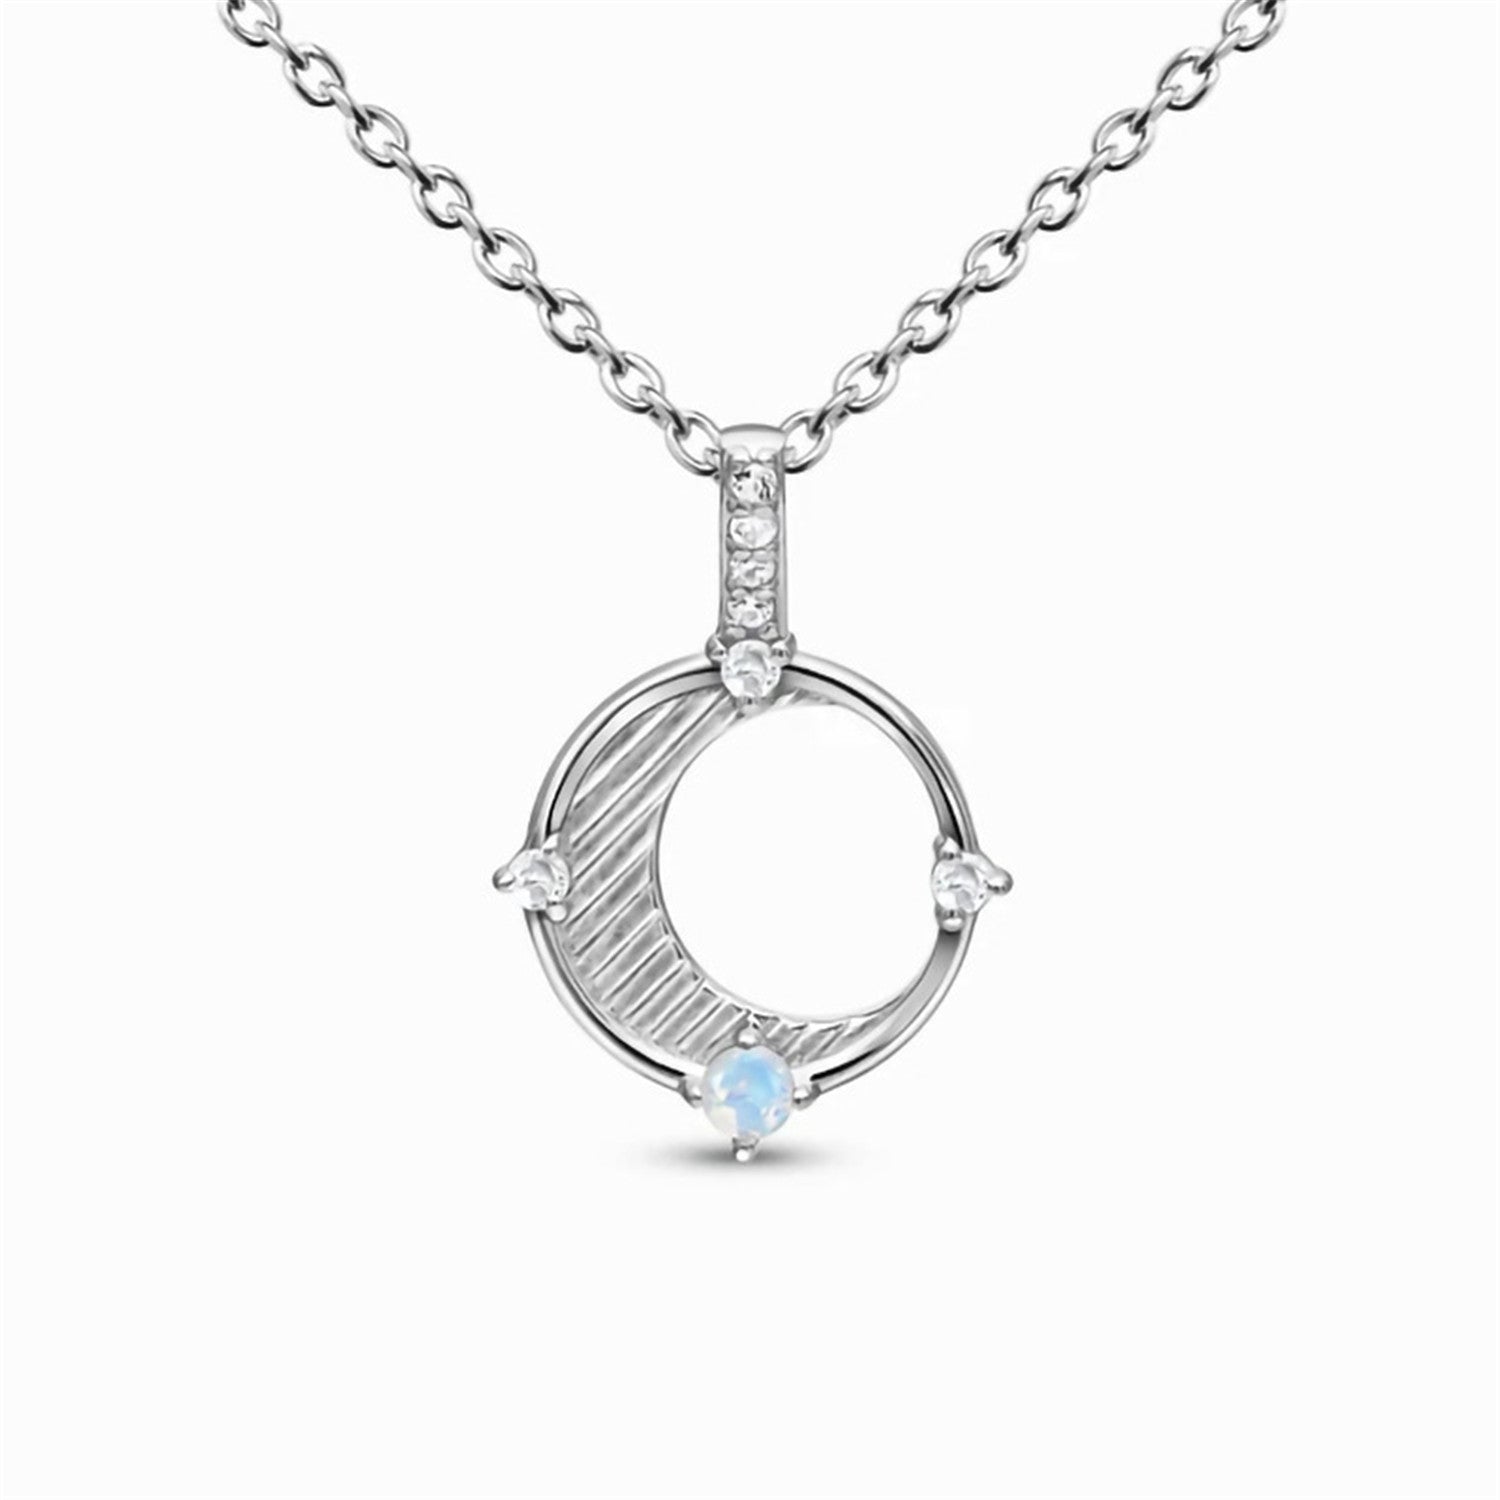 Moonstone Pendant,s925 Silver,O Shape Tag With Hollowed Out Crescent Moon Design